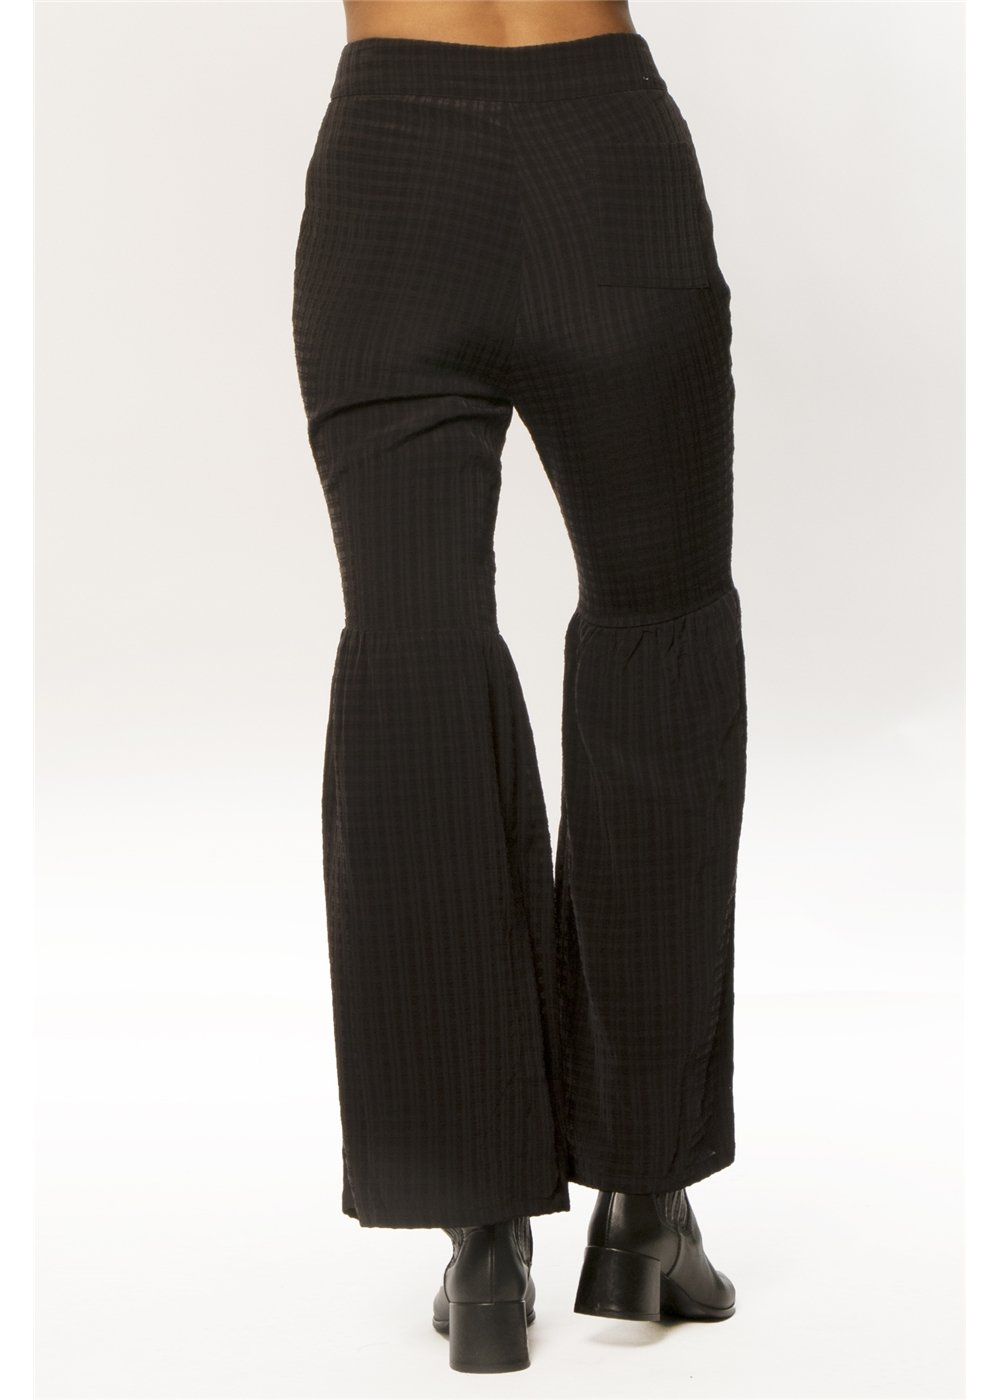 Society Amuse Women's Black Cantina Woven Pant. Back View on Model.